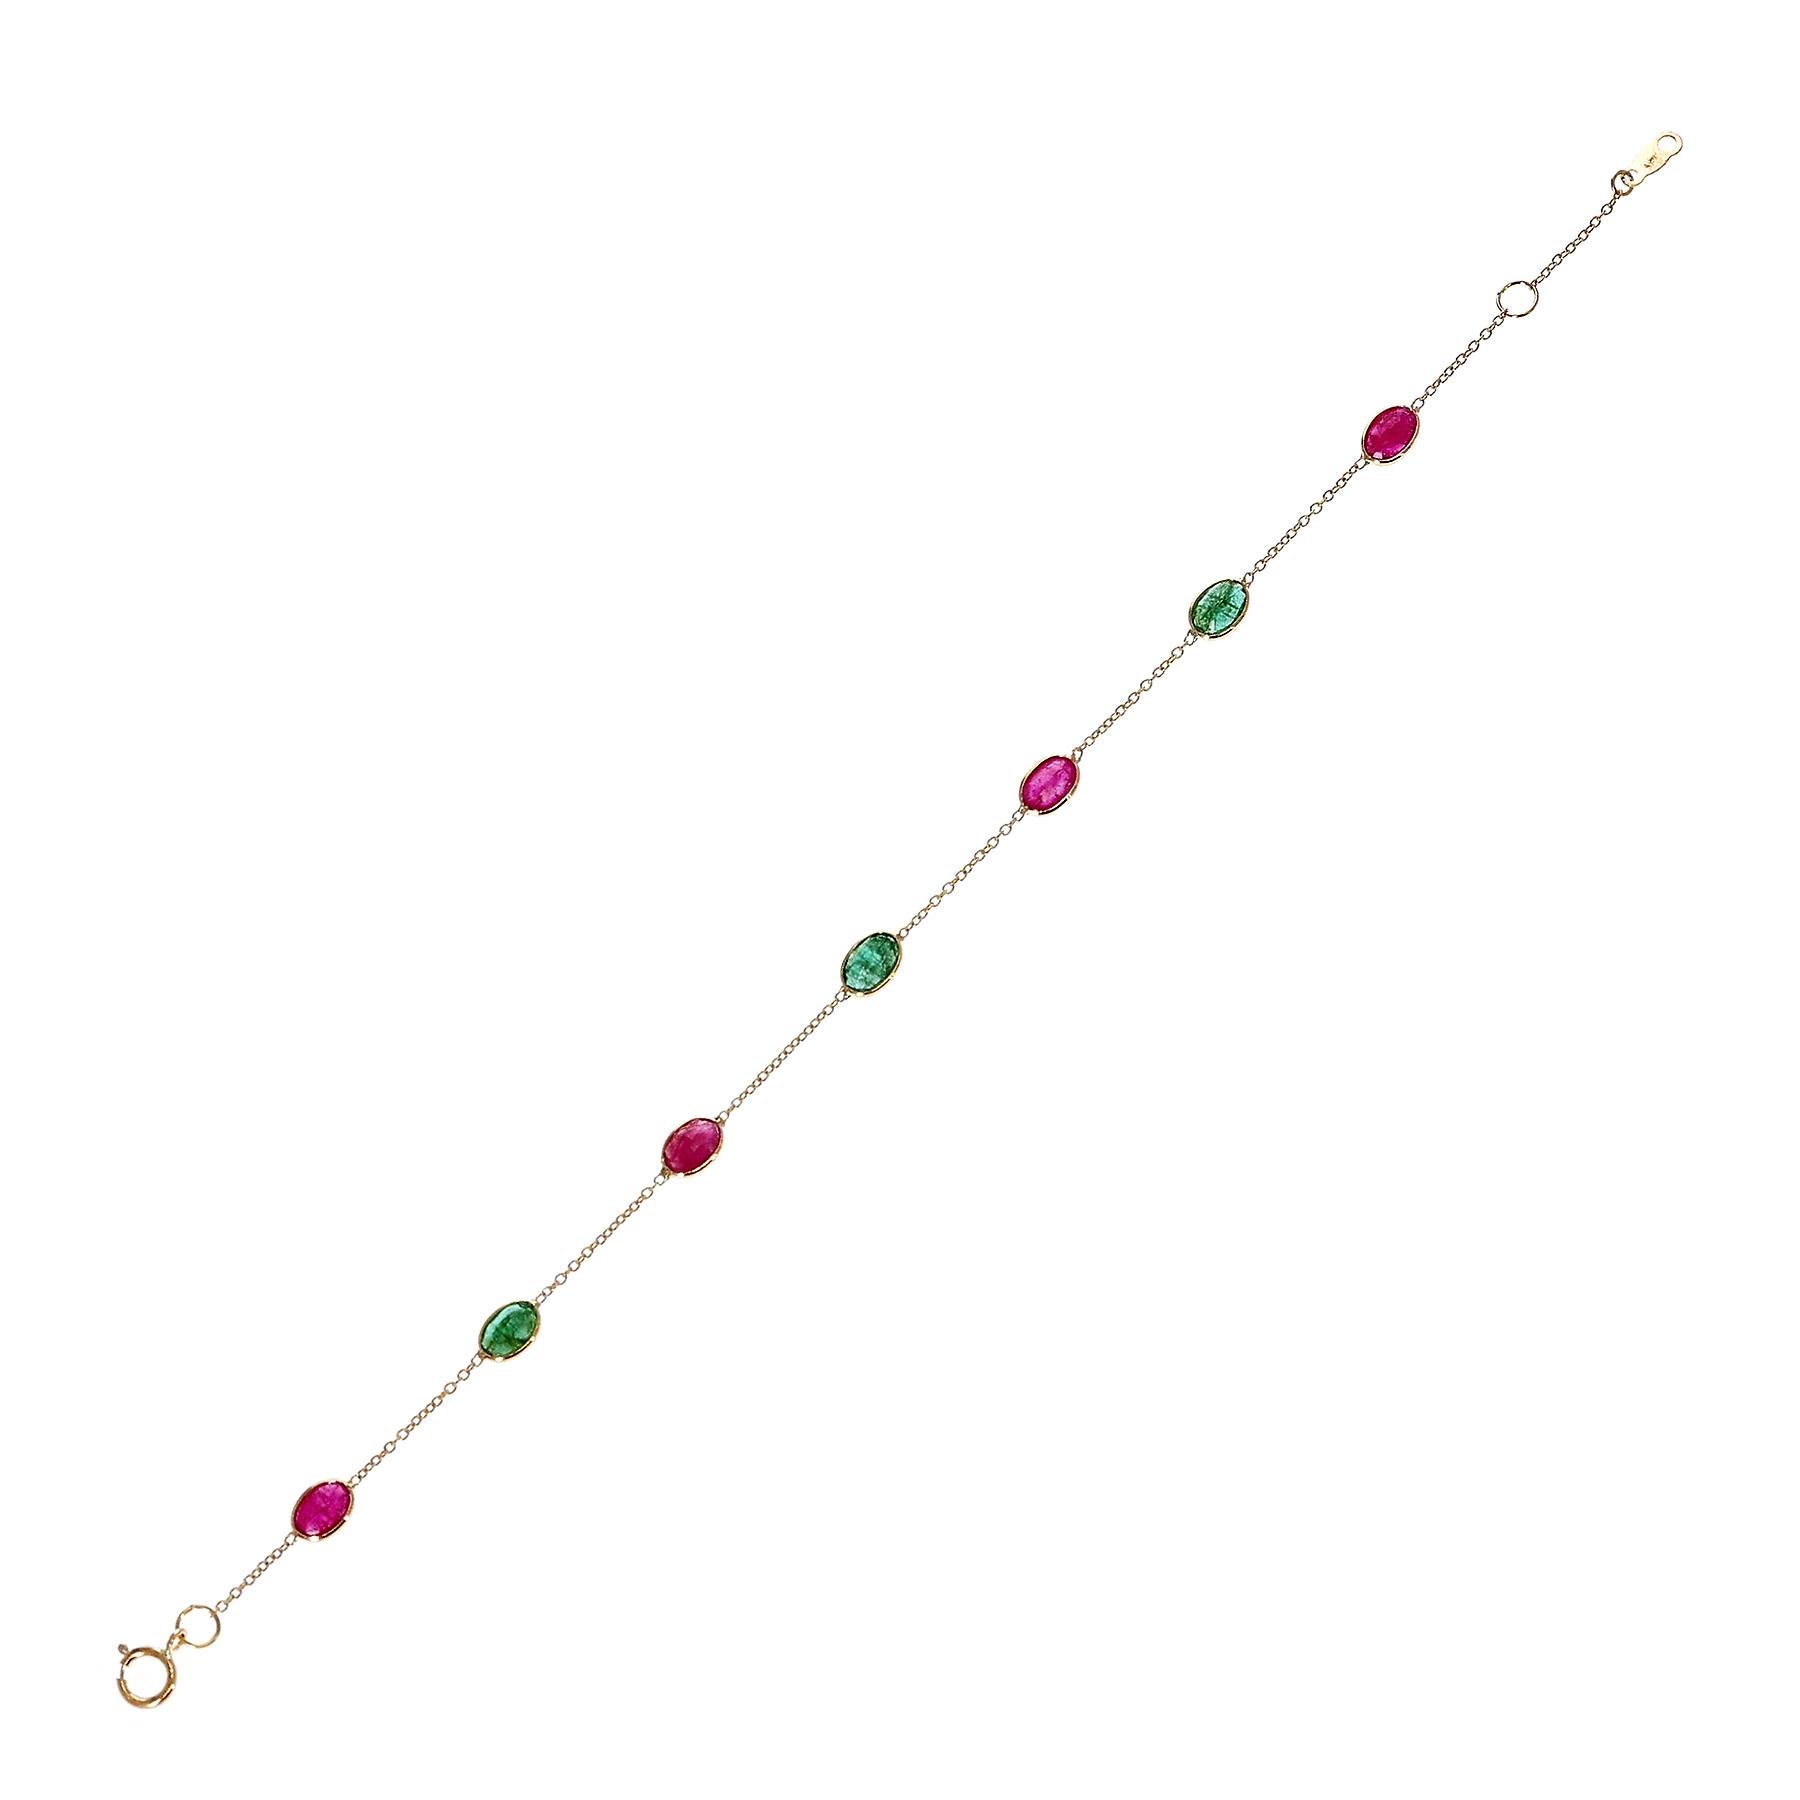 An Oval Genuine Ruby and Emerald 18k Yellow Gold Adjustable Bracelet. The length of the bracelet can either be 6.75